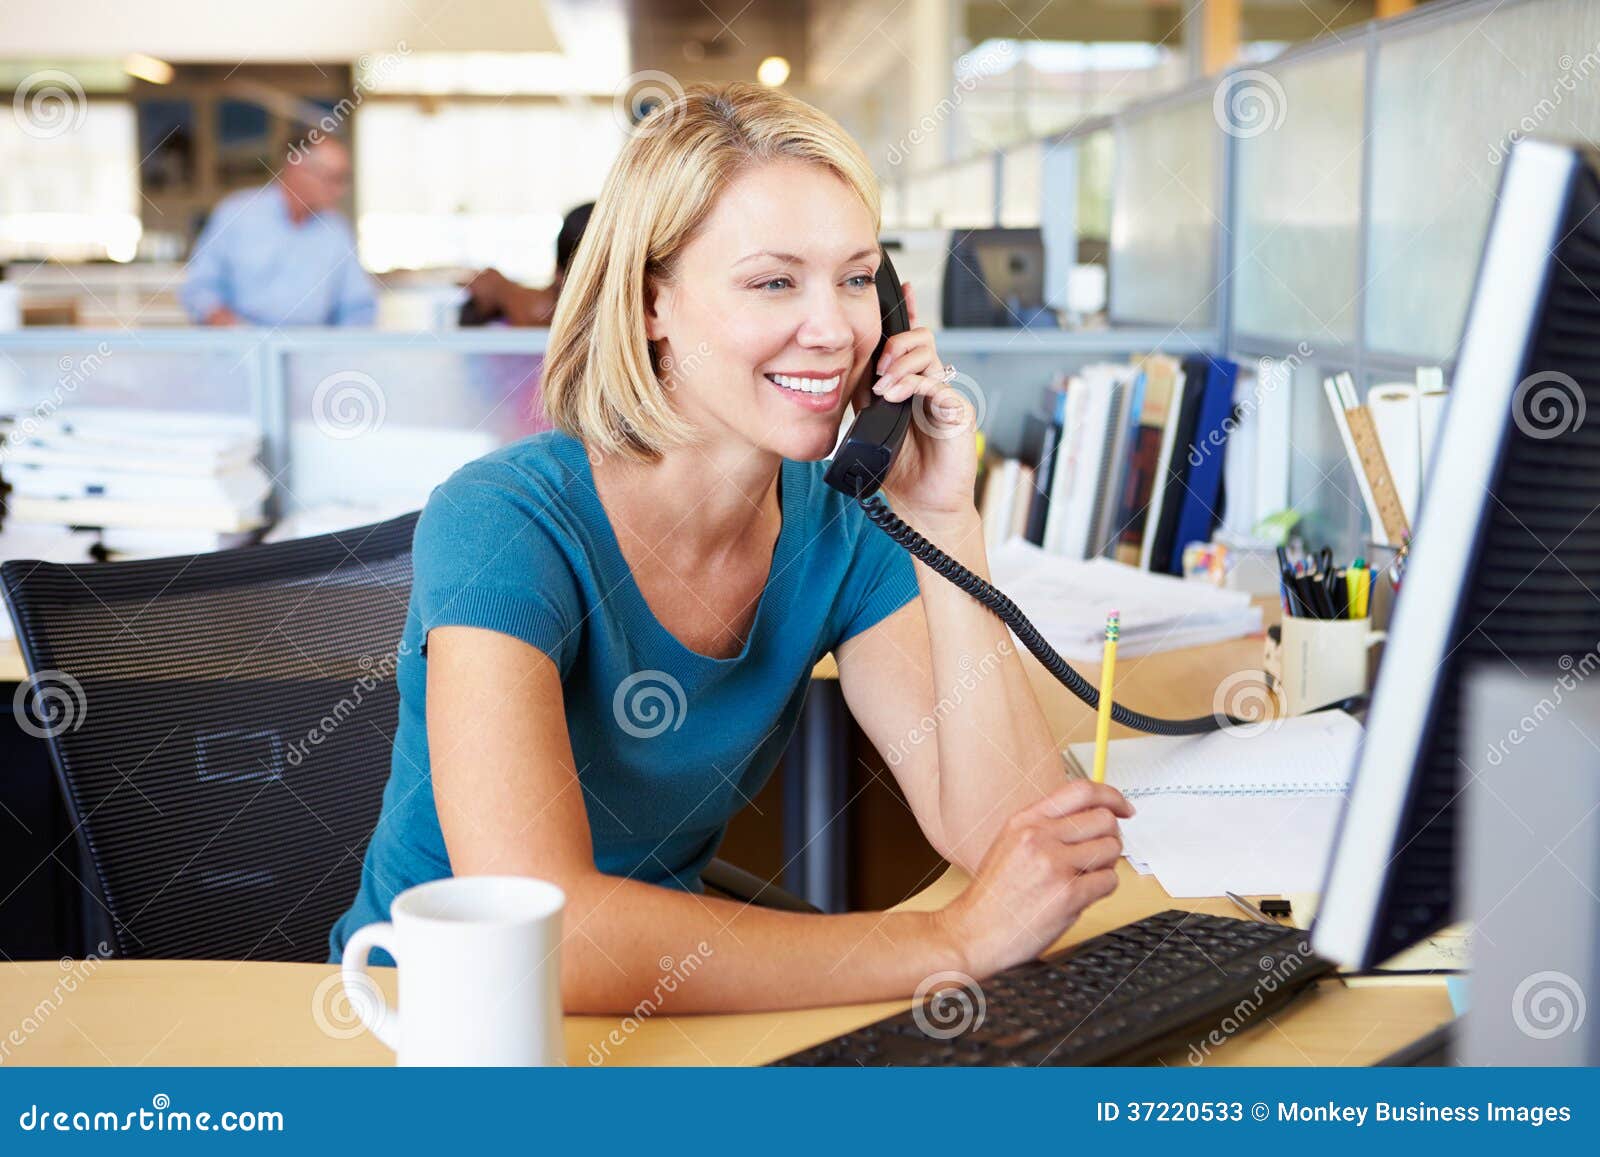 woman on phone in busy modern office